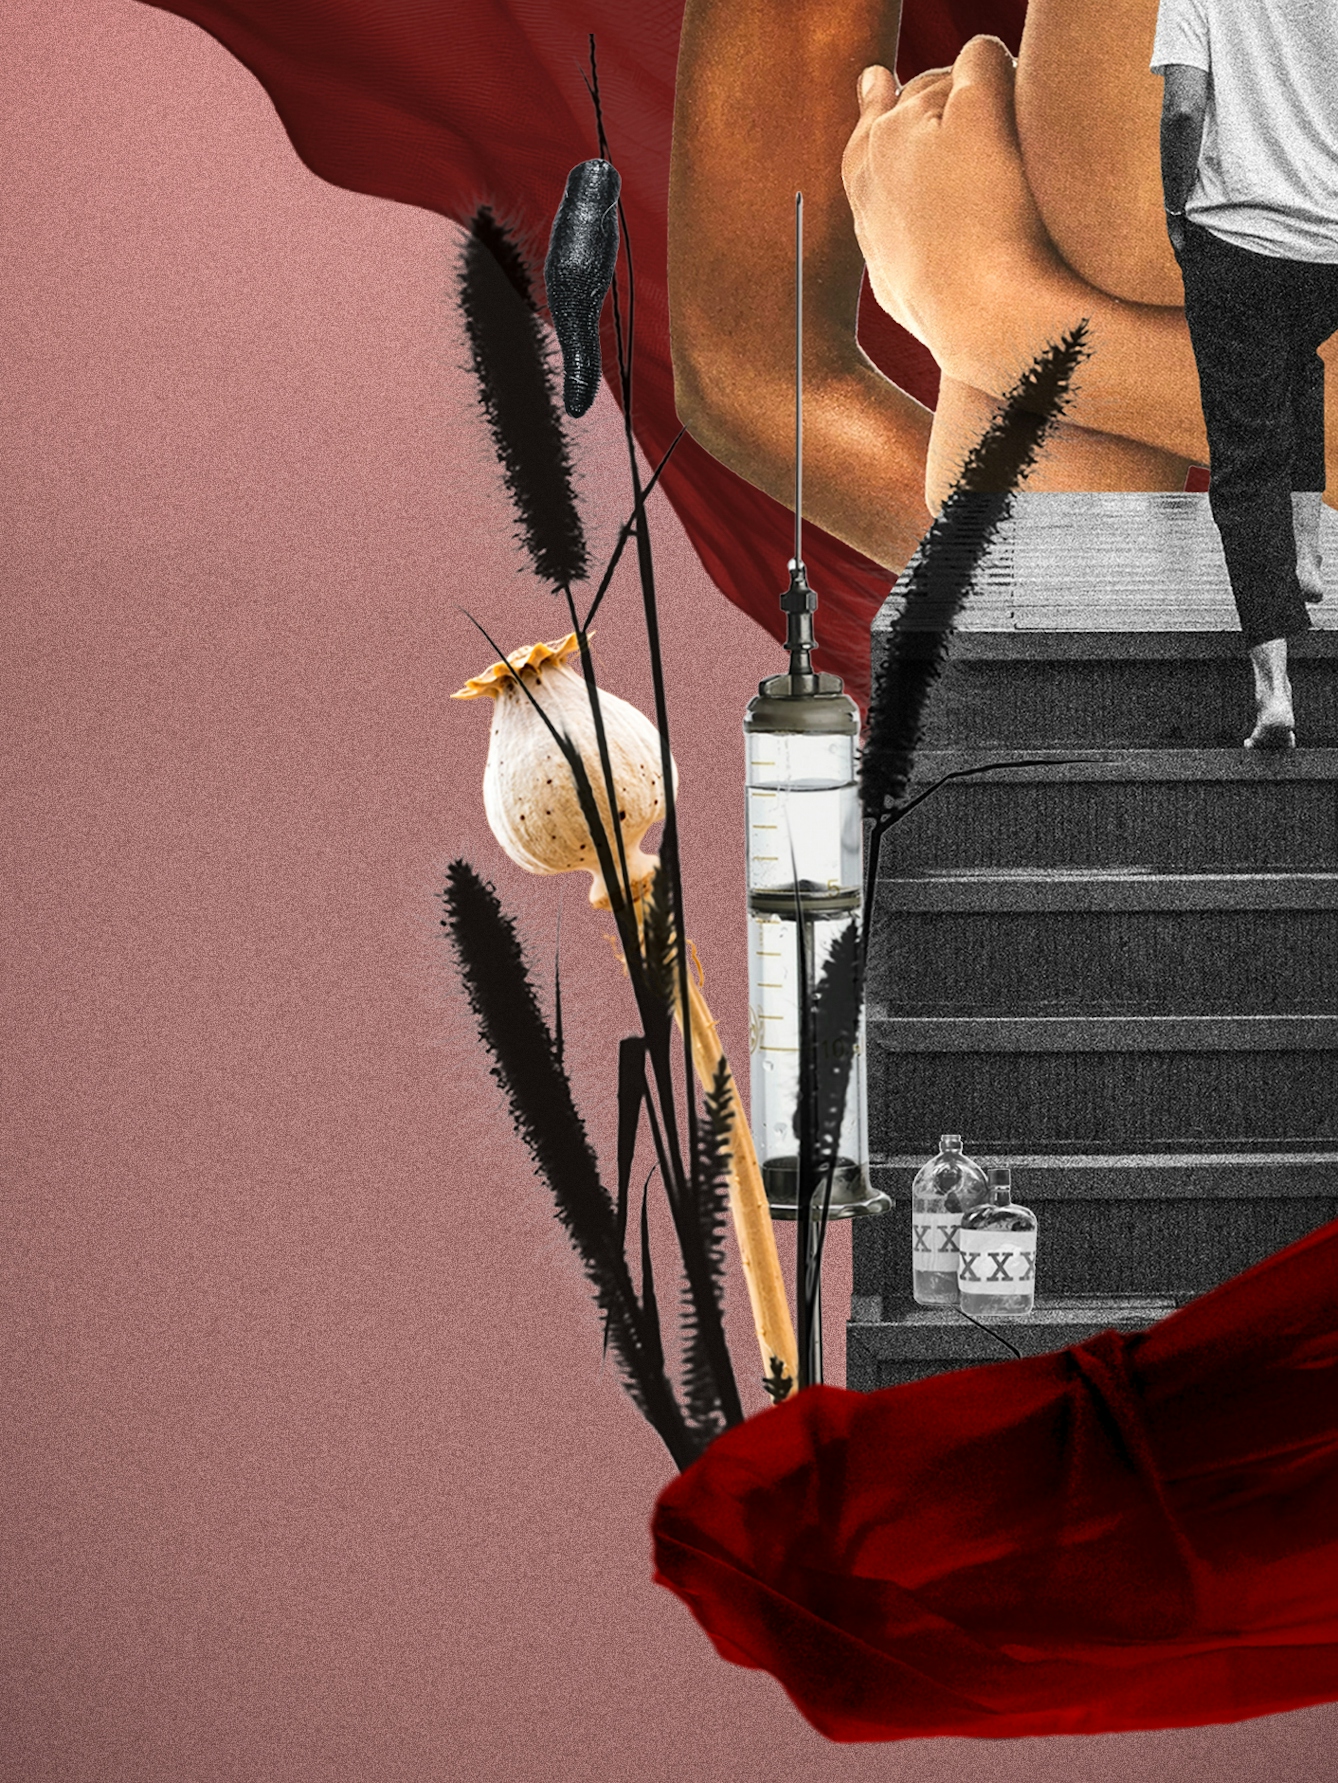 Detail from a larger digital collage artwork made up of pink, red and black and white hues. At the centre is a staircase rising up. At the top is the back of a woman who has just reach the top. In front of her are fragments of two large female torsos. At the base of the staircase are a collection of objects, a poppy seed head, a syringe, a leech, grasses and 2 bottles with XXX printed on the label.